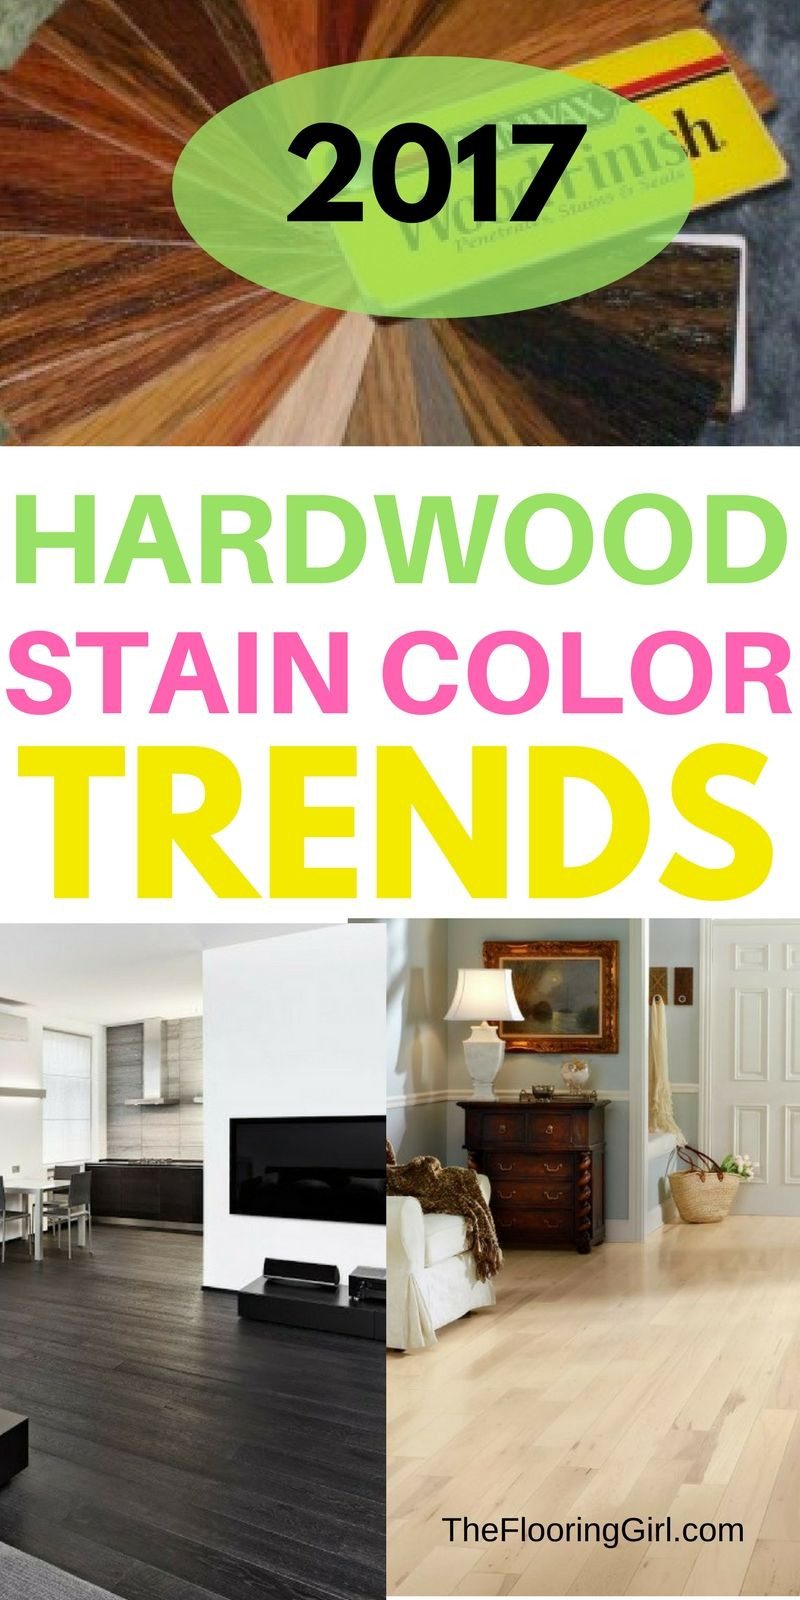 24 Ideal Hardwood Floor Color Trends 2016 2022 free download hardwood floor color trends 2016 of hardwood flooring stain color trends 2018 more from the flooring with hardwood flooring stain color trends for 2017 hardwood colors that are in style thef